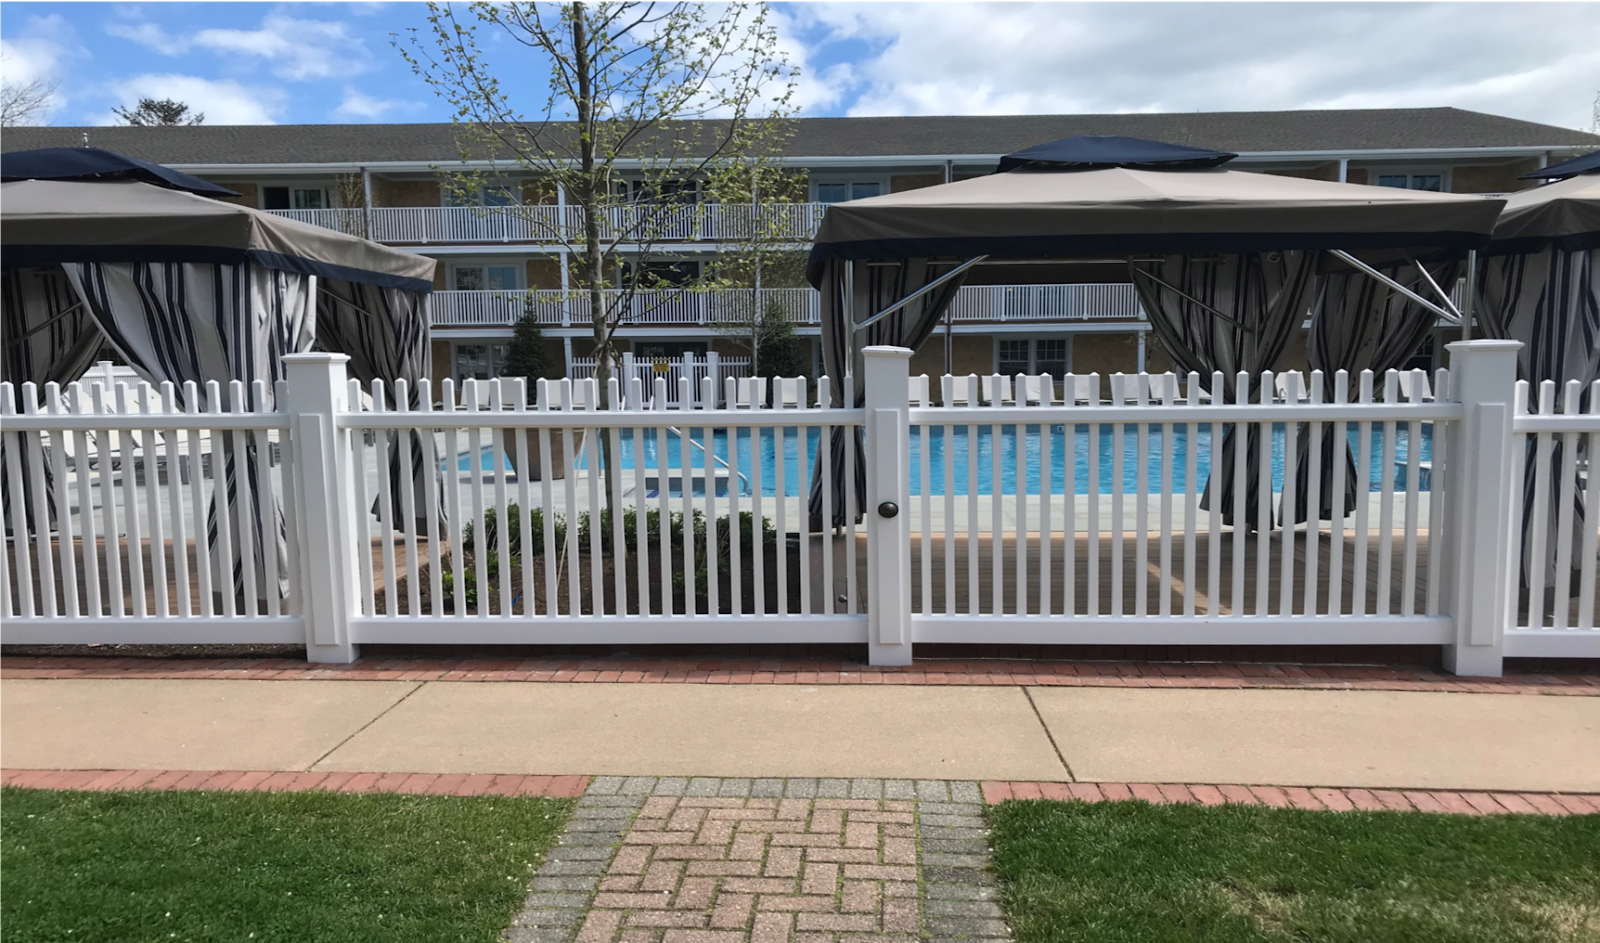 Cellular PVC fencing surrounding a pool.